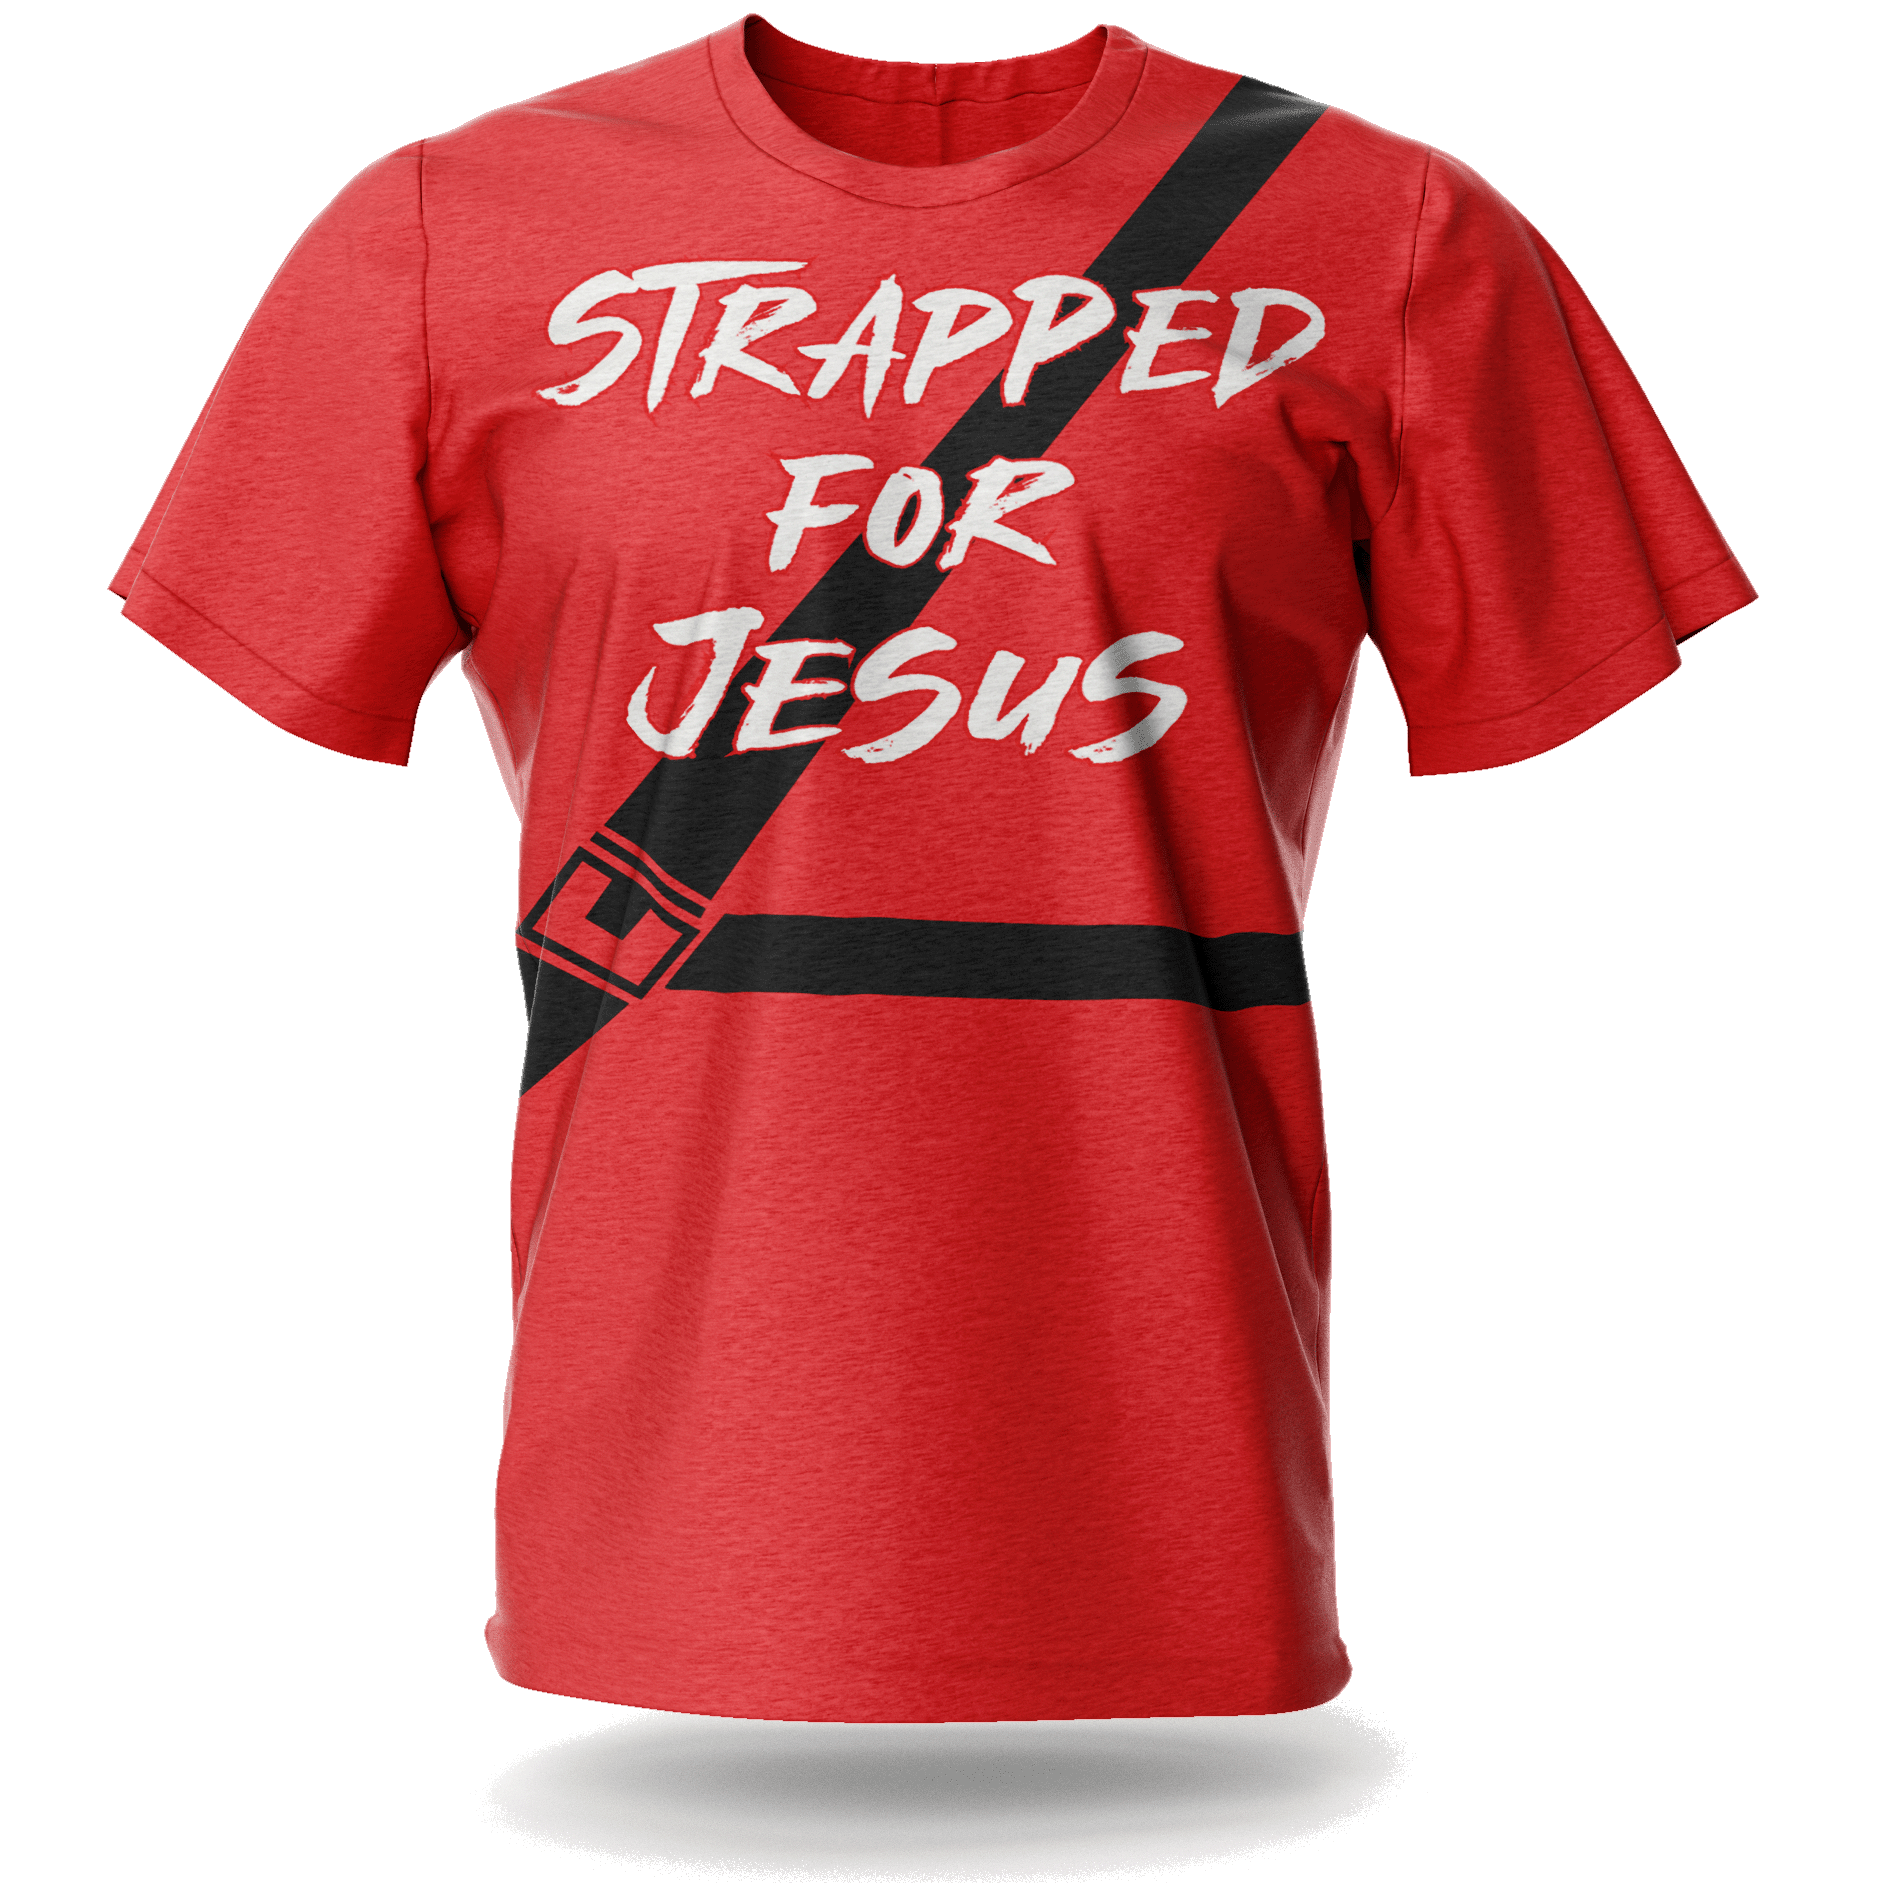 Strapped For Jesus Tee